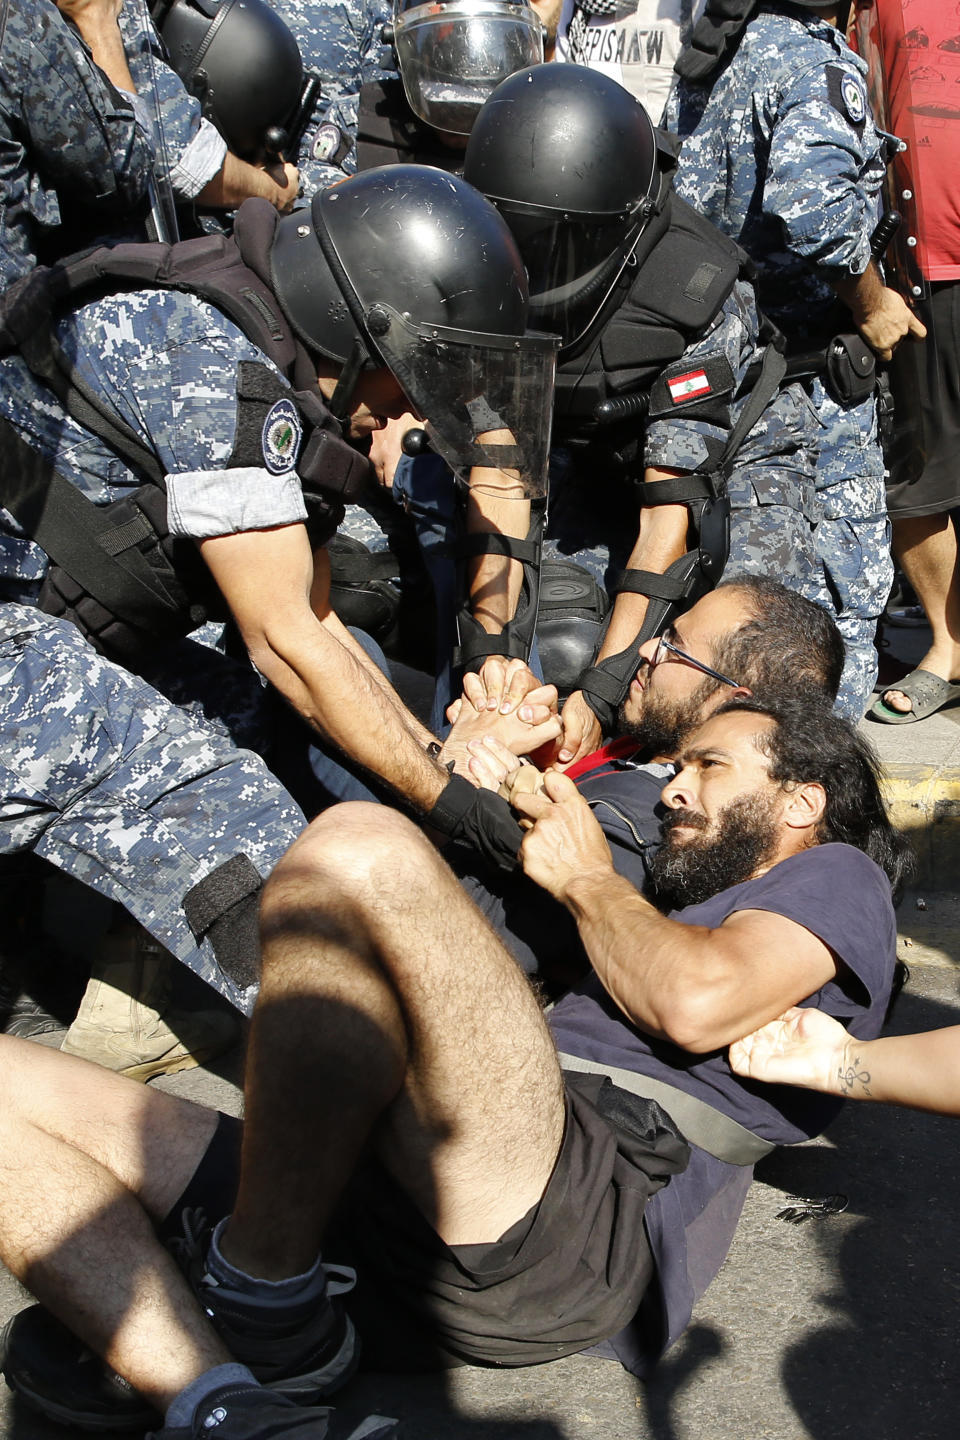 Anti-government protesters lie on a road holding each other as riot police try to remove them and open the road, in Beirut, Lebanon, Thursday, Oct. 31, 2019. Army units and riot police took down barriers and tents set up in the middle of highways and major intersections Thursday. (AP Photo/Bilal Hussein)